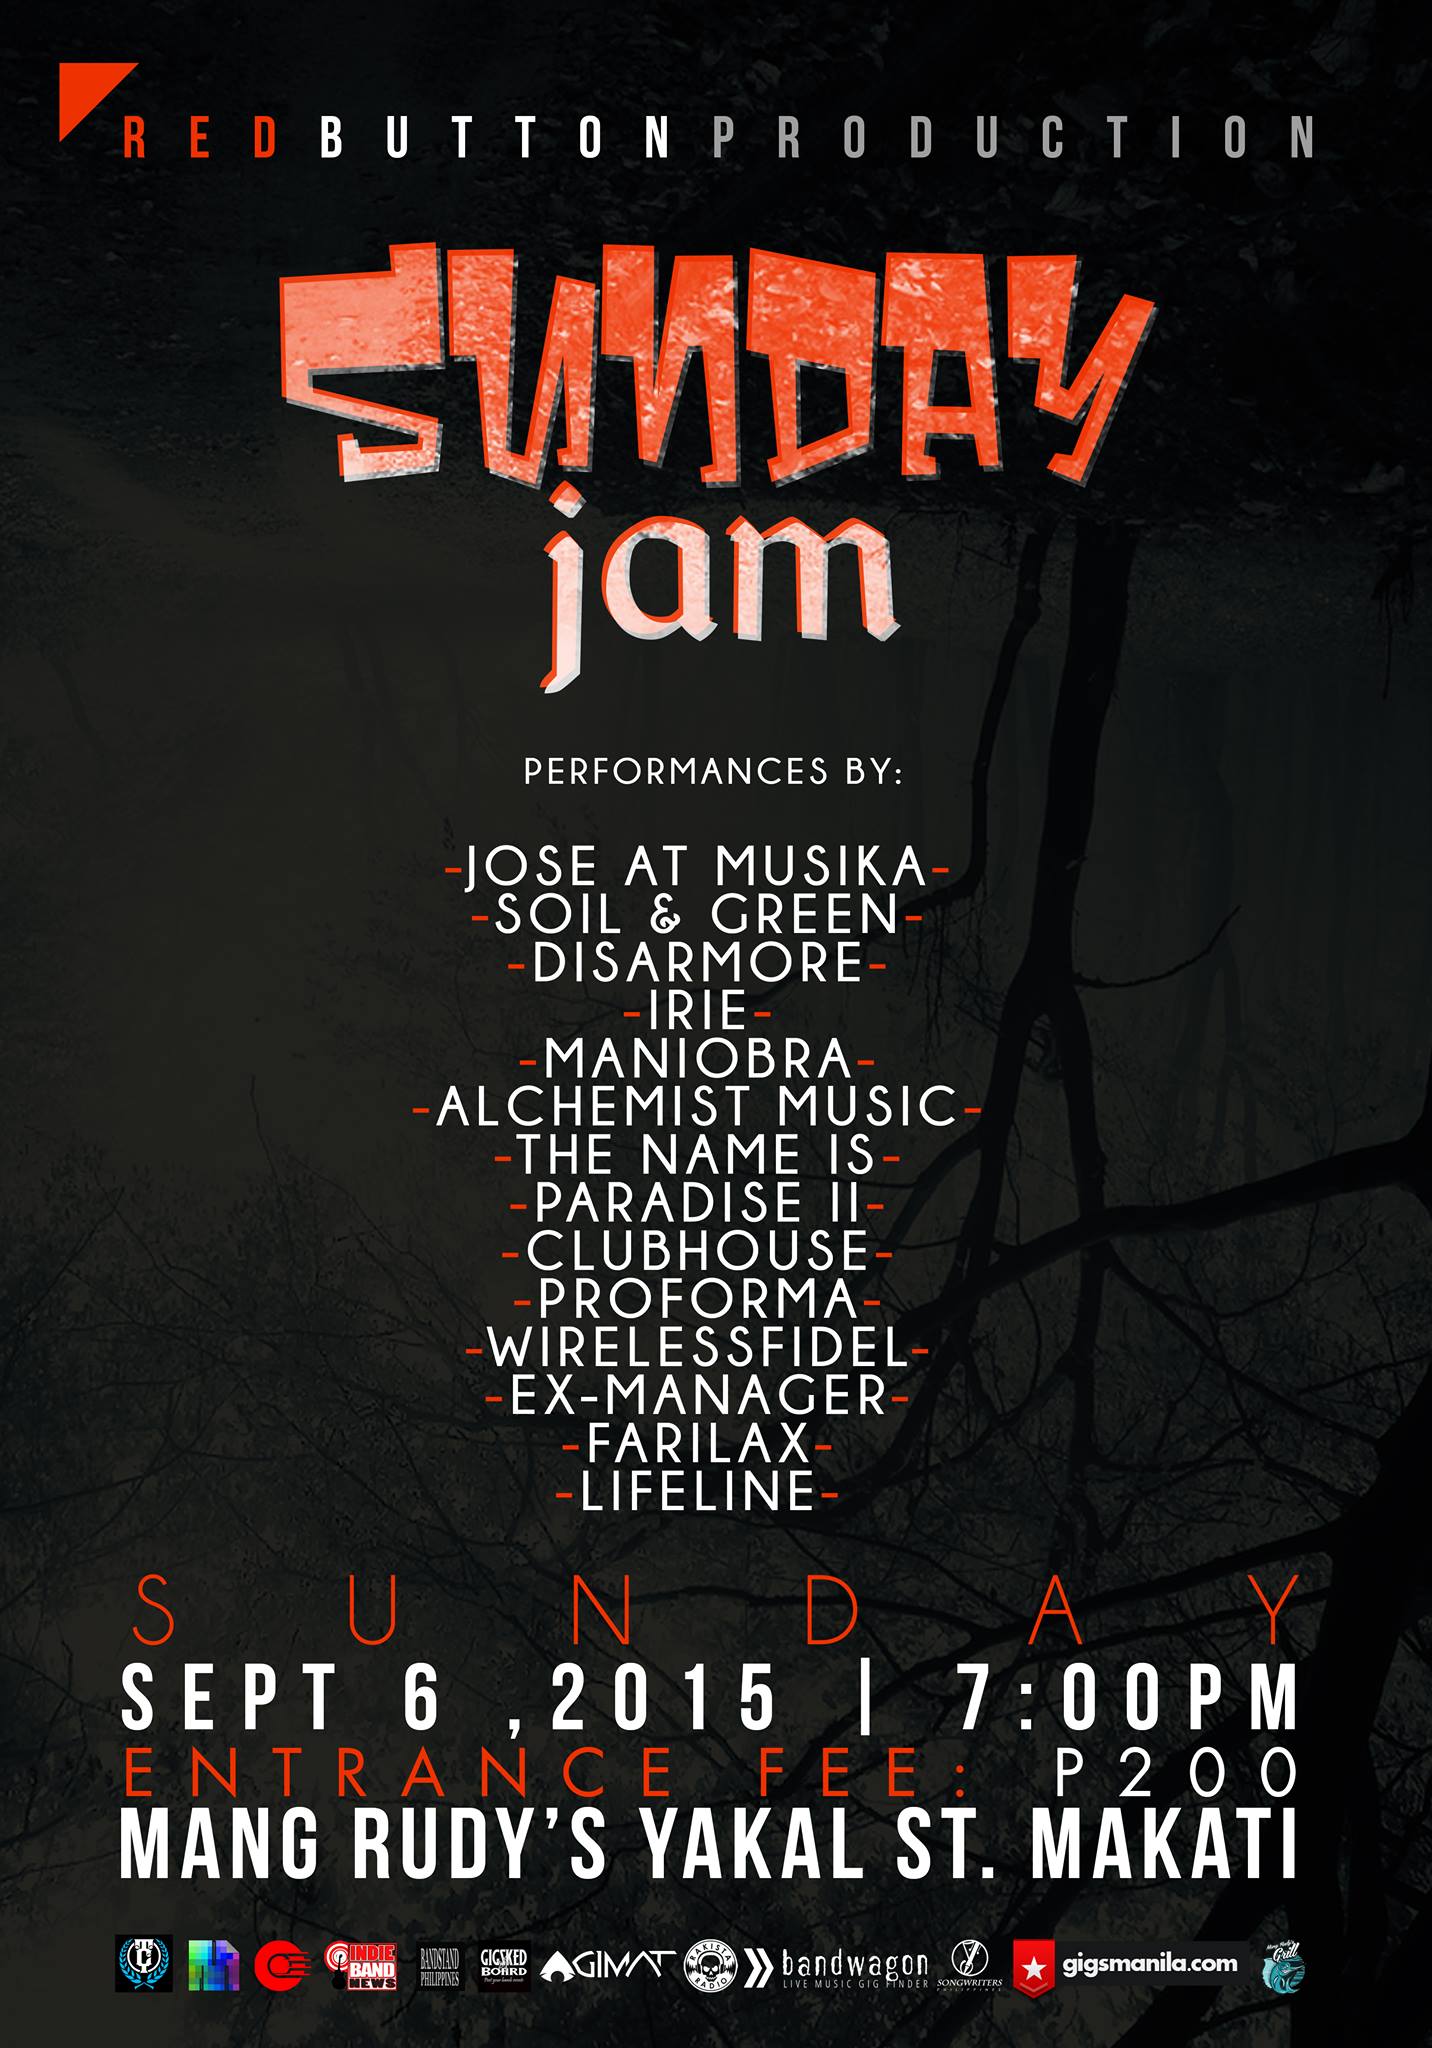 Red Button Production "Sunday Jam" September 6, Sunday | 7:00PM Mang Rudy's, Yakal St., Makati Entrance Fee: P200 with 1 Beer performances by: Jose at Musika Soil & Green Disarmore Irie Maniobra Alchemist Music The Name Is Paradise II Clubhouse ProForma Wirelessfidel Ex-Manager Farilax Lifeline